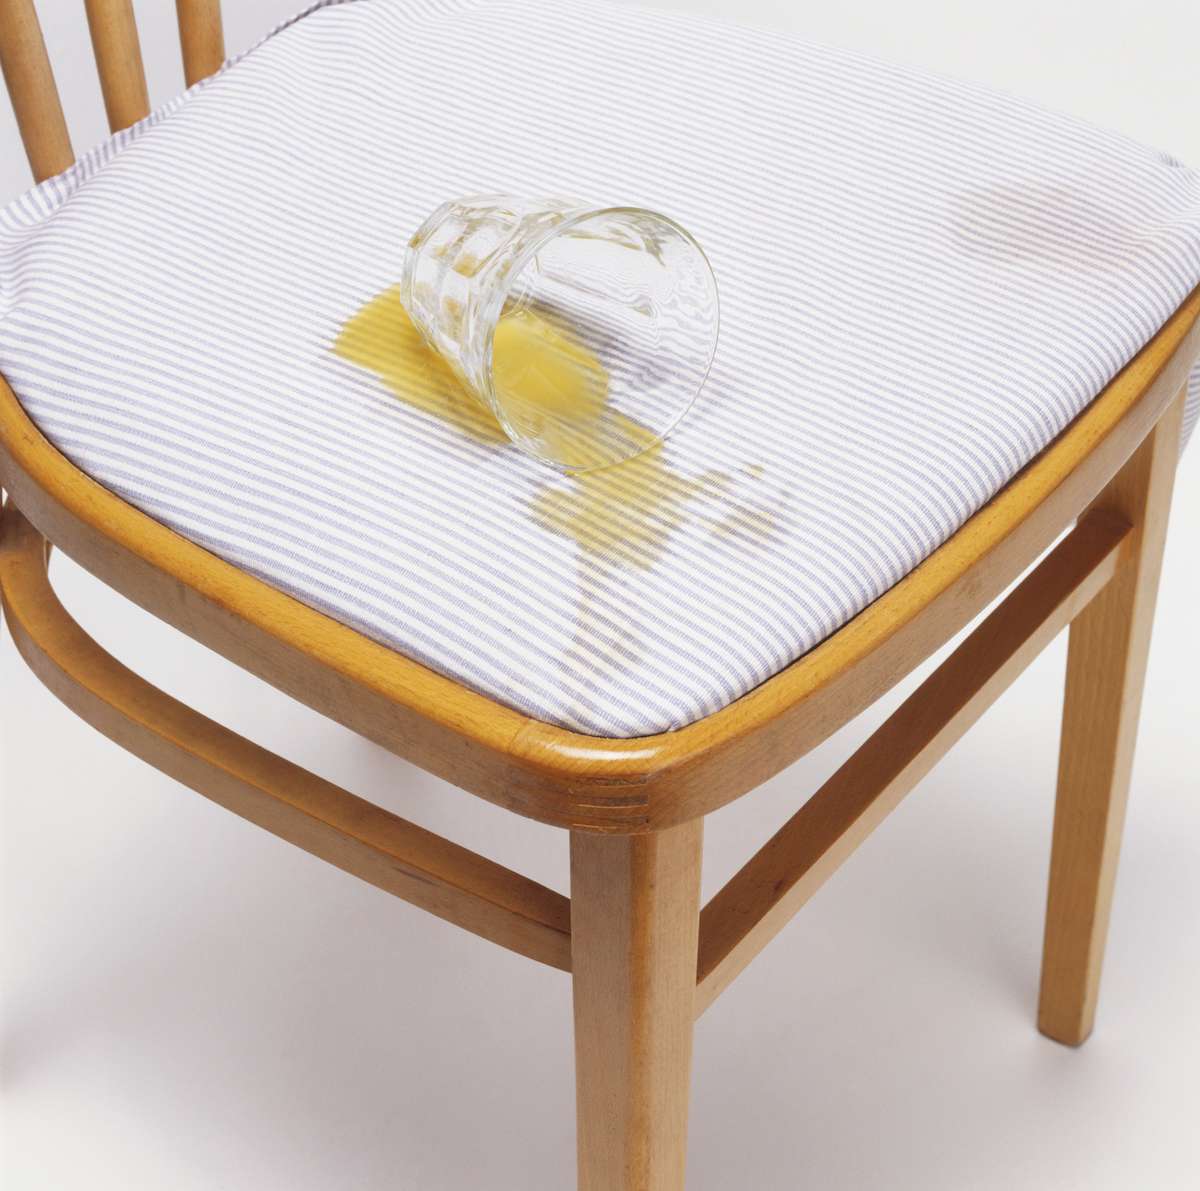 juice stain on a chair seat